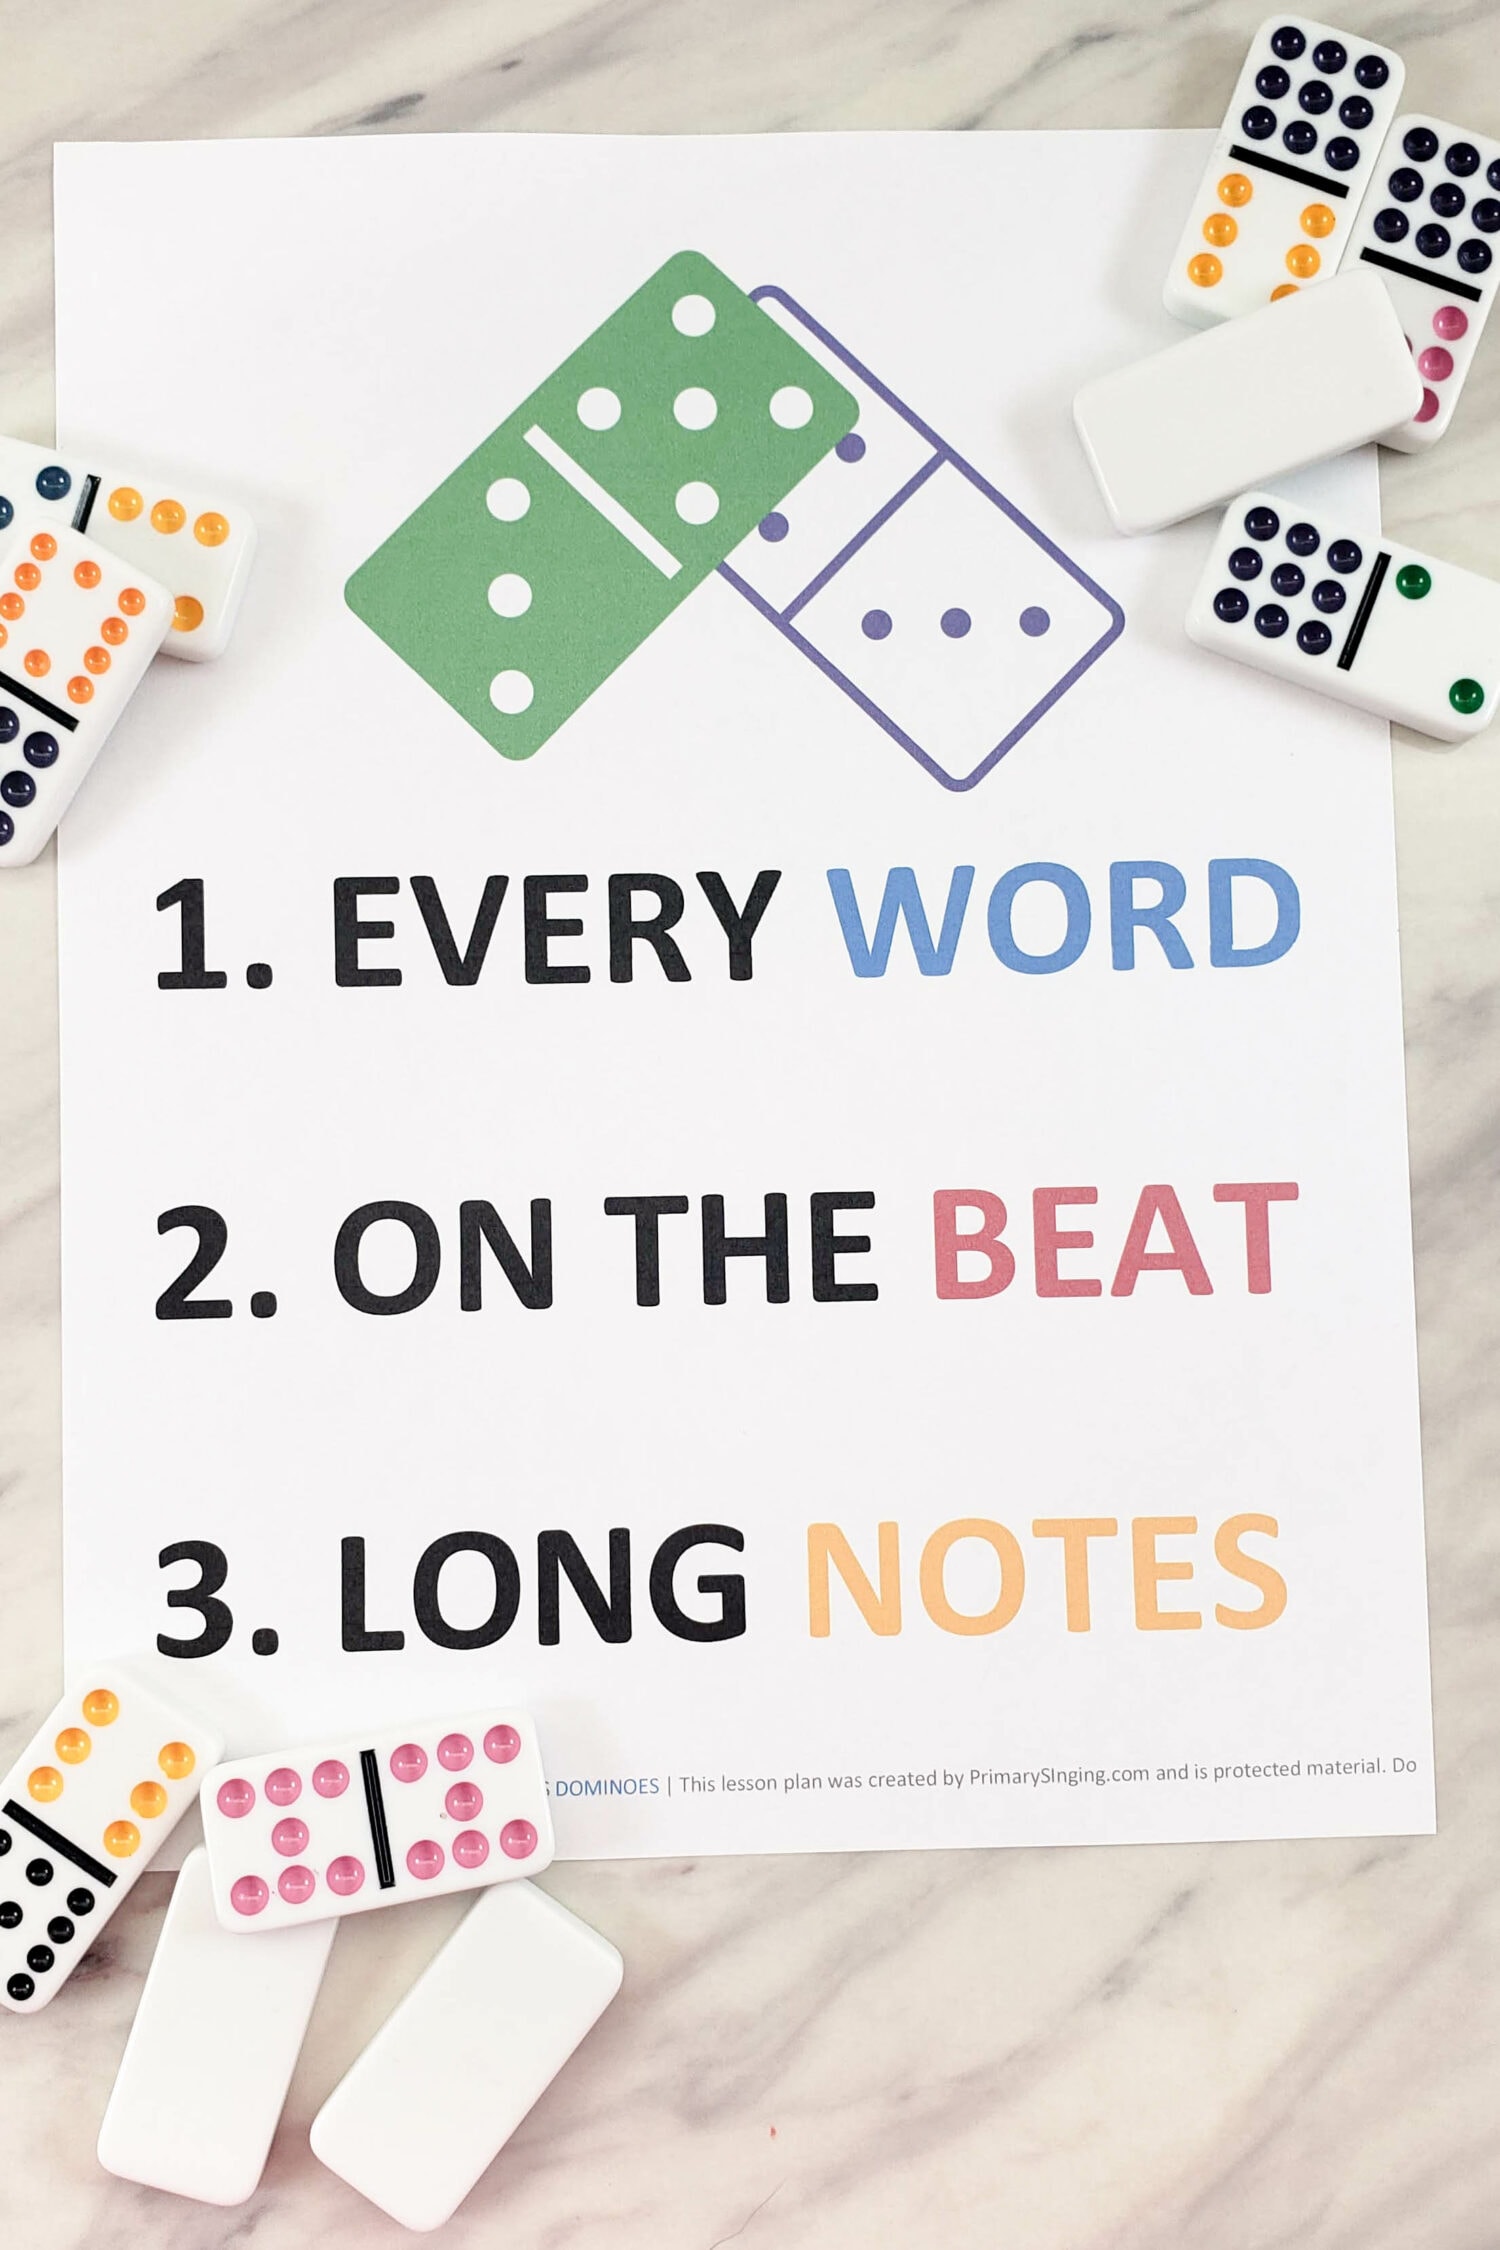 Use this fun I'm Trying to Be Like Jesus Dominoes singing time idea to make music come to life in a fun way! Printable song helps for LDS Primary music leaders.